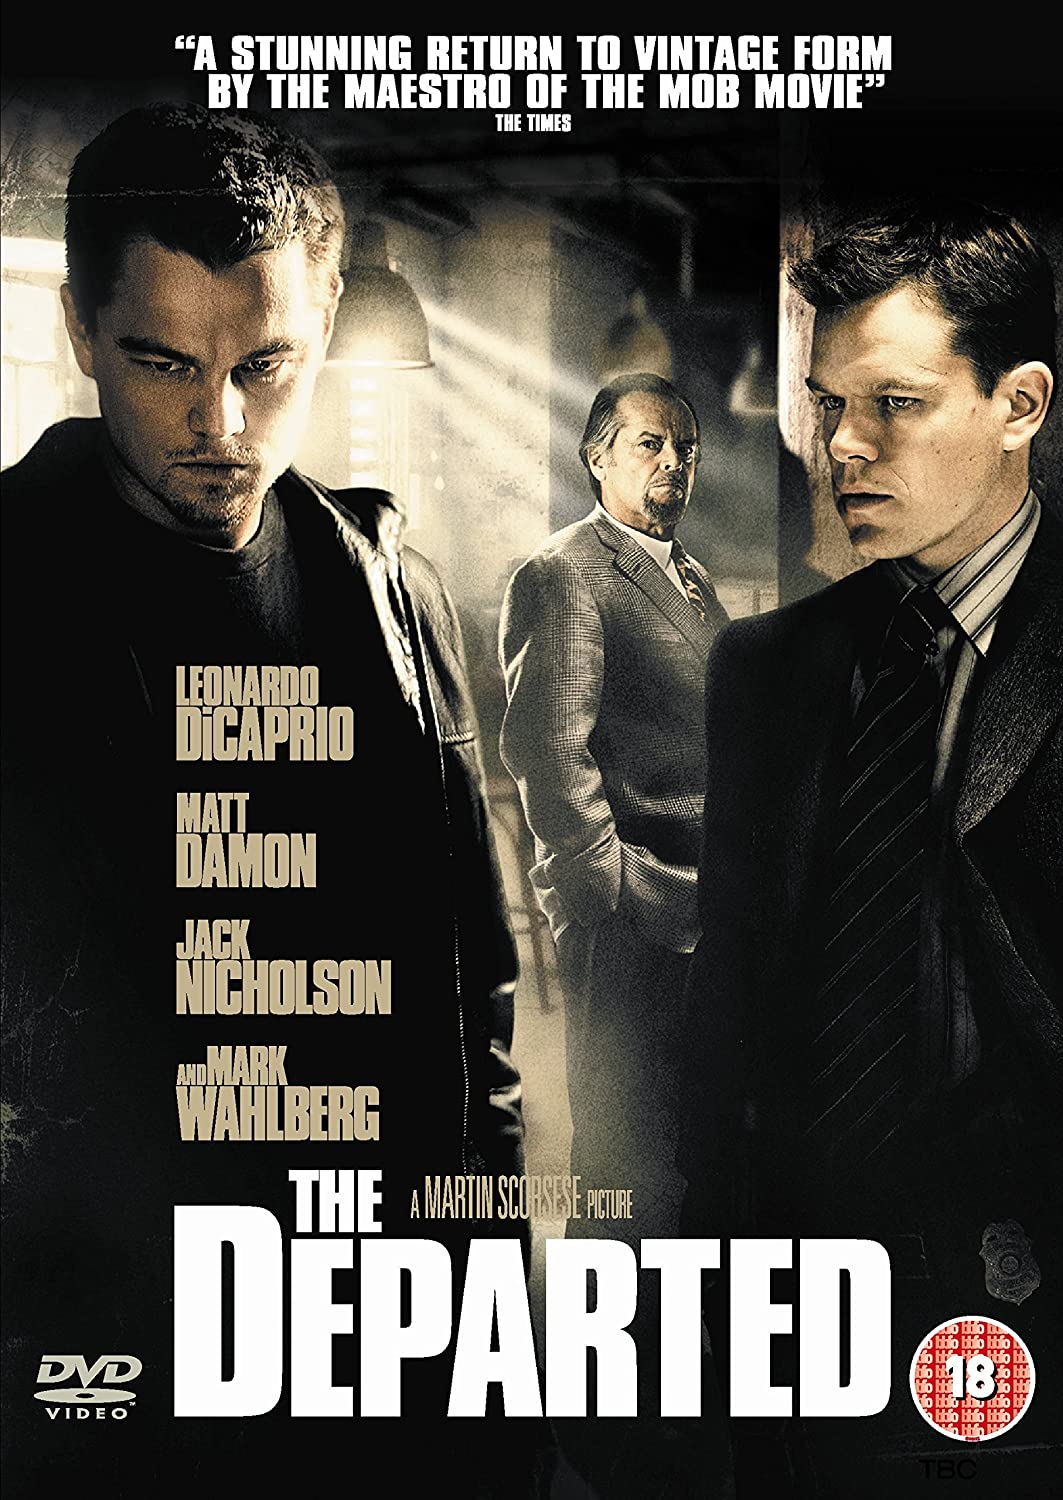 The Departed [Region 1] -  Crime/Drama [DVD]